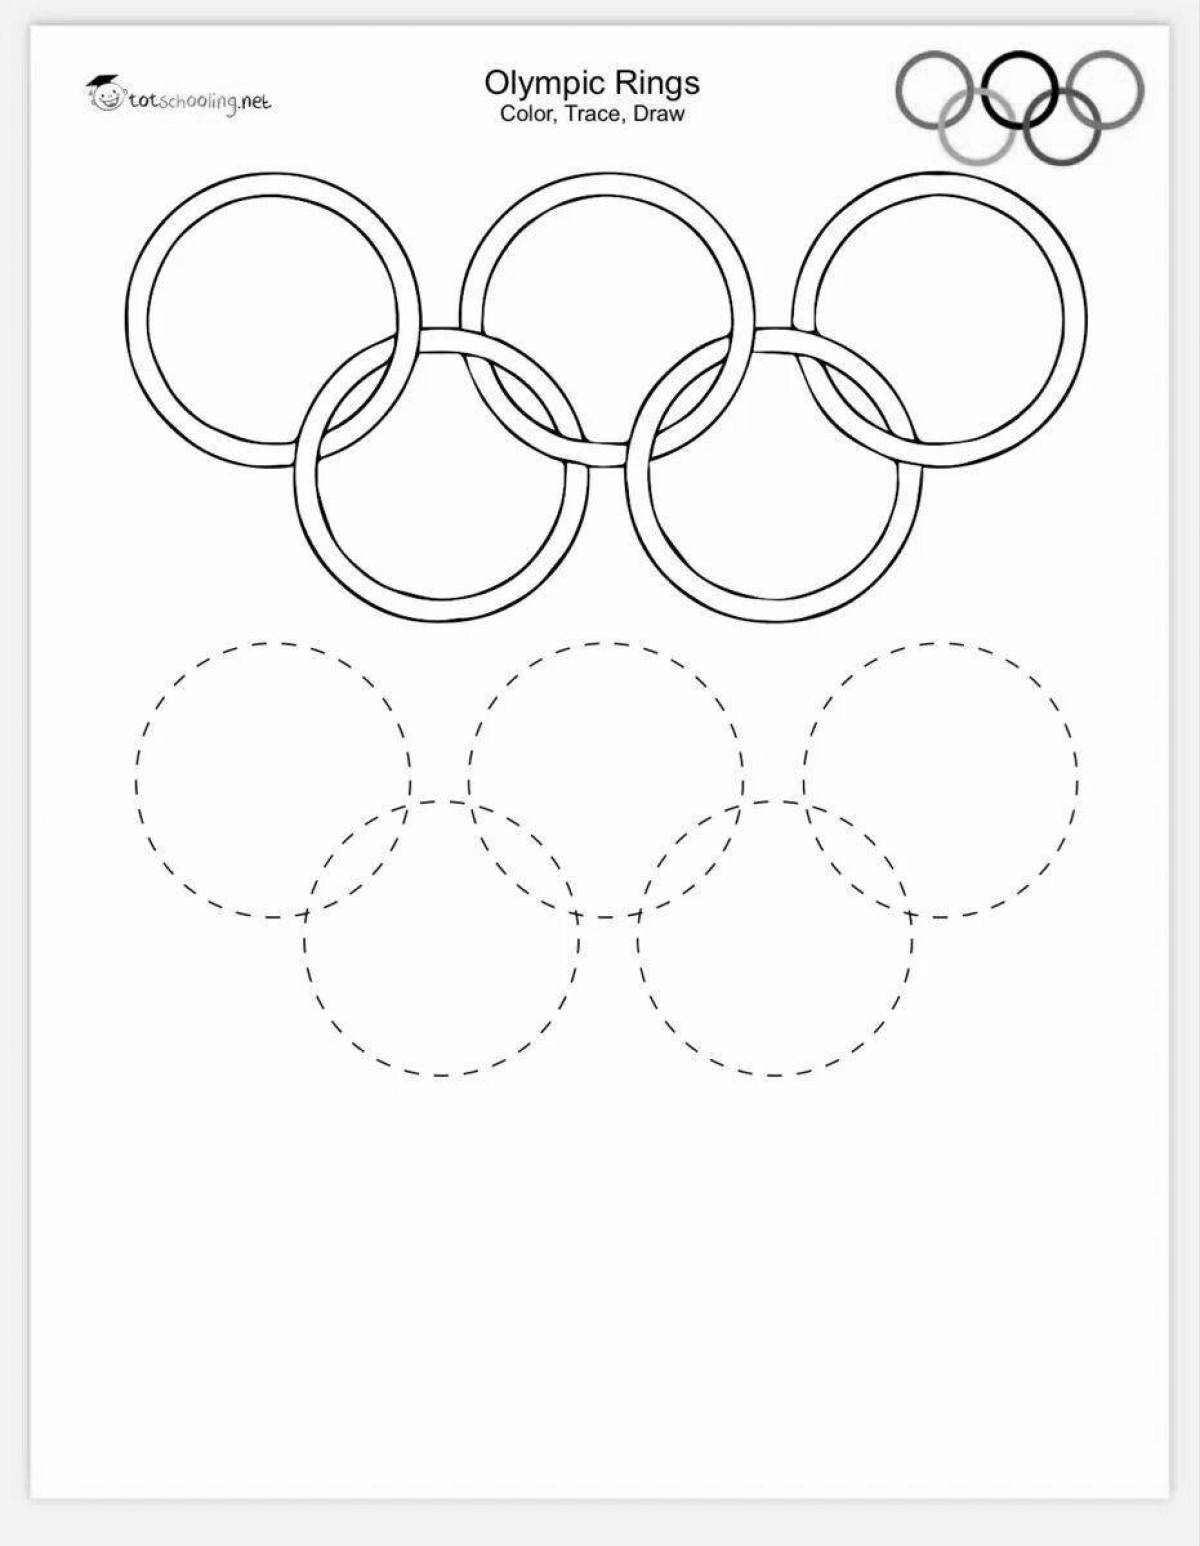 Glorious olympic rings printable coloring page